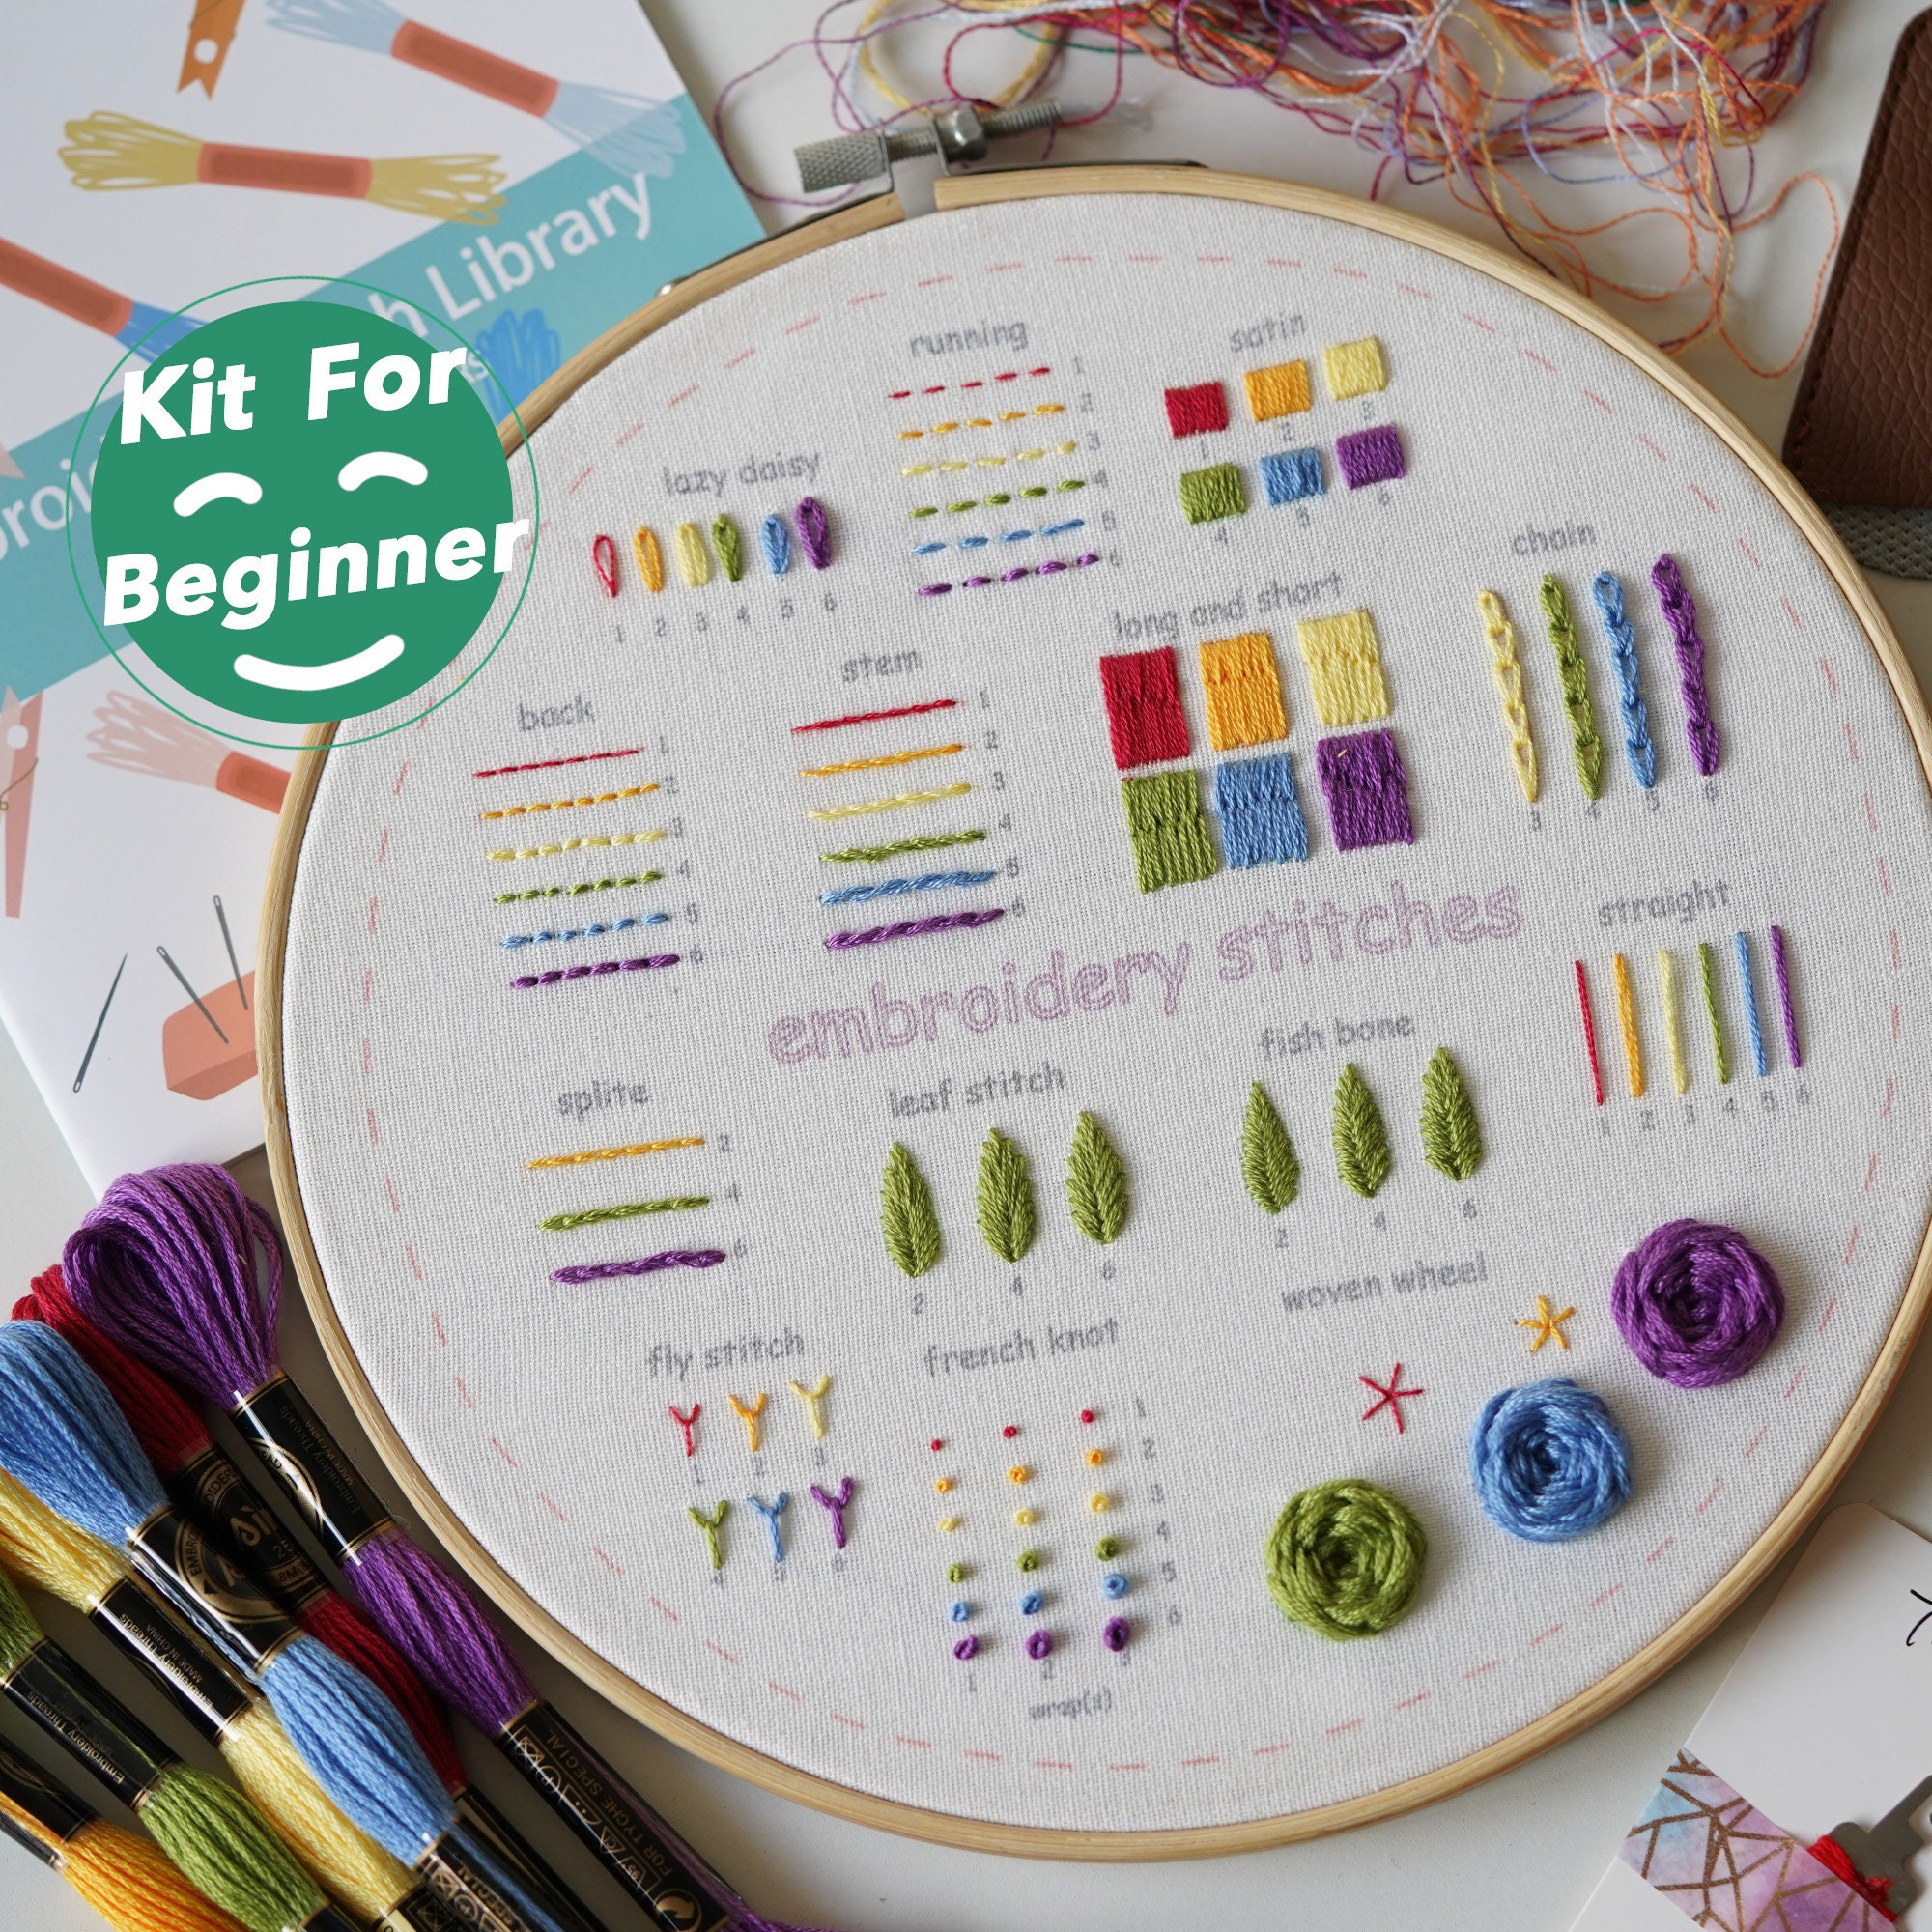 KARLSITEK Embroidery Starter kit with Patterns and Instructions